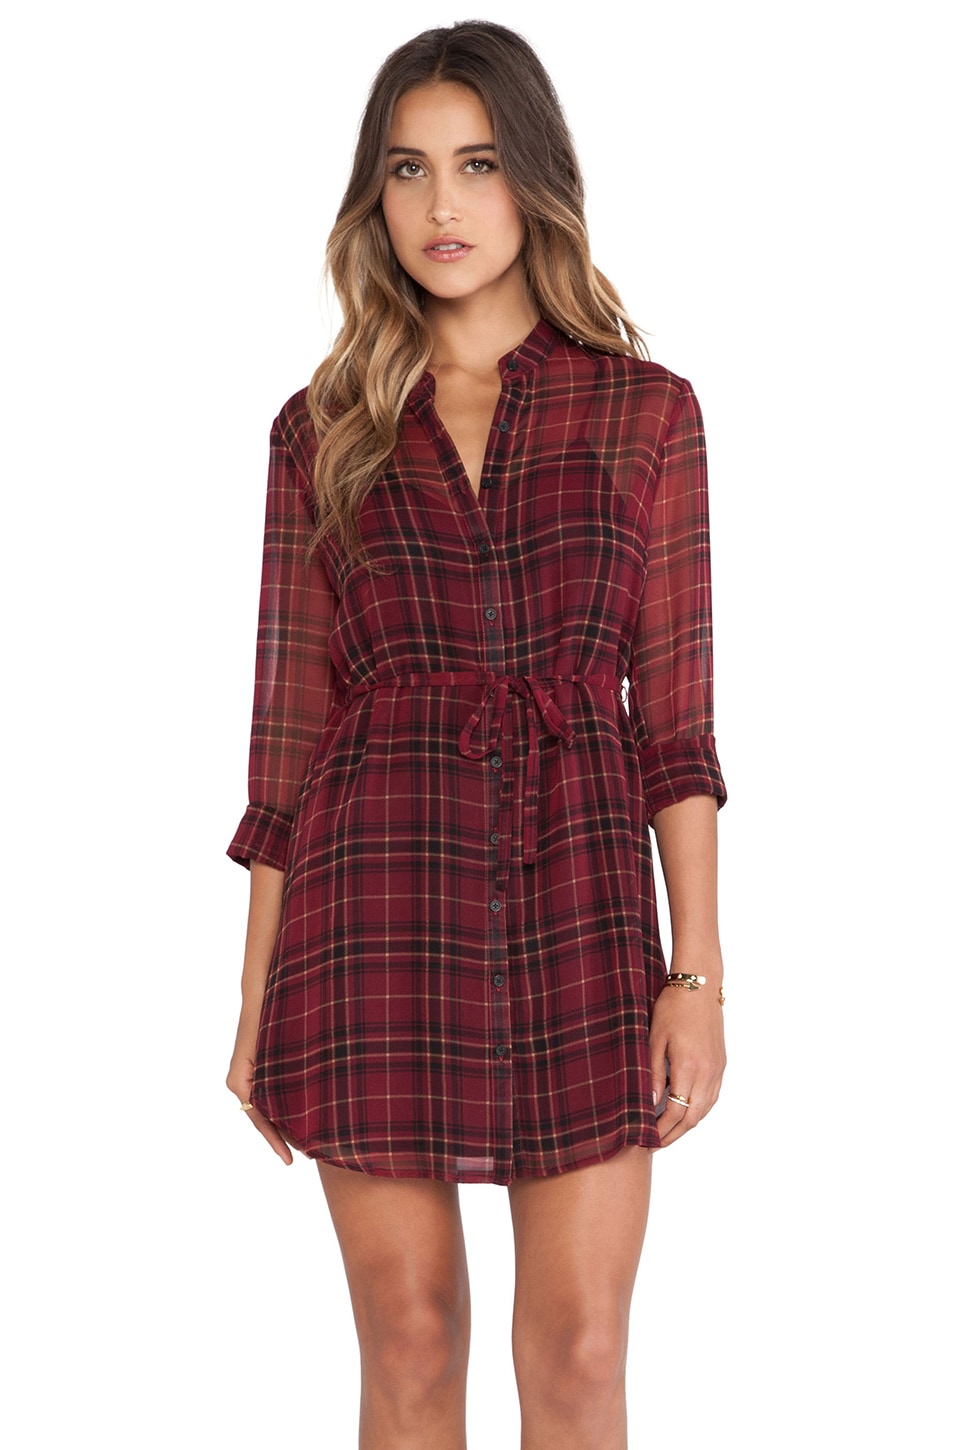 Steve Madden Abrie Plaid Dress in Beet Red | REVOLVE